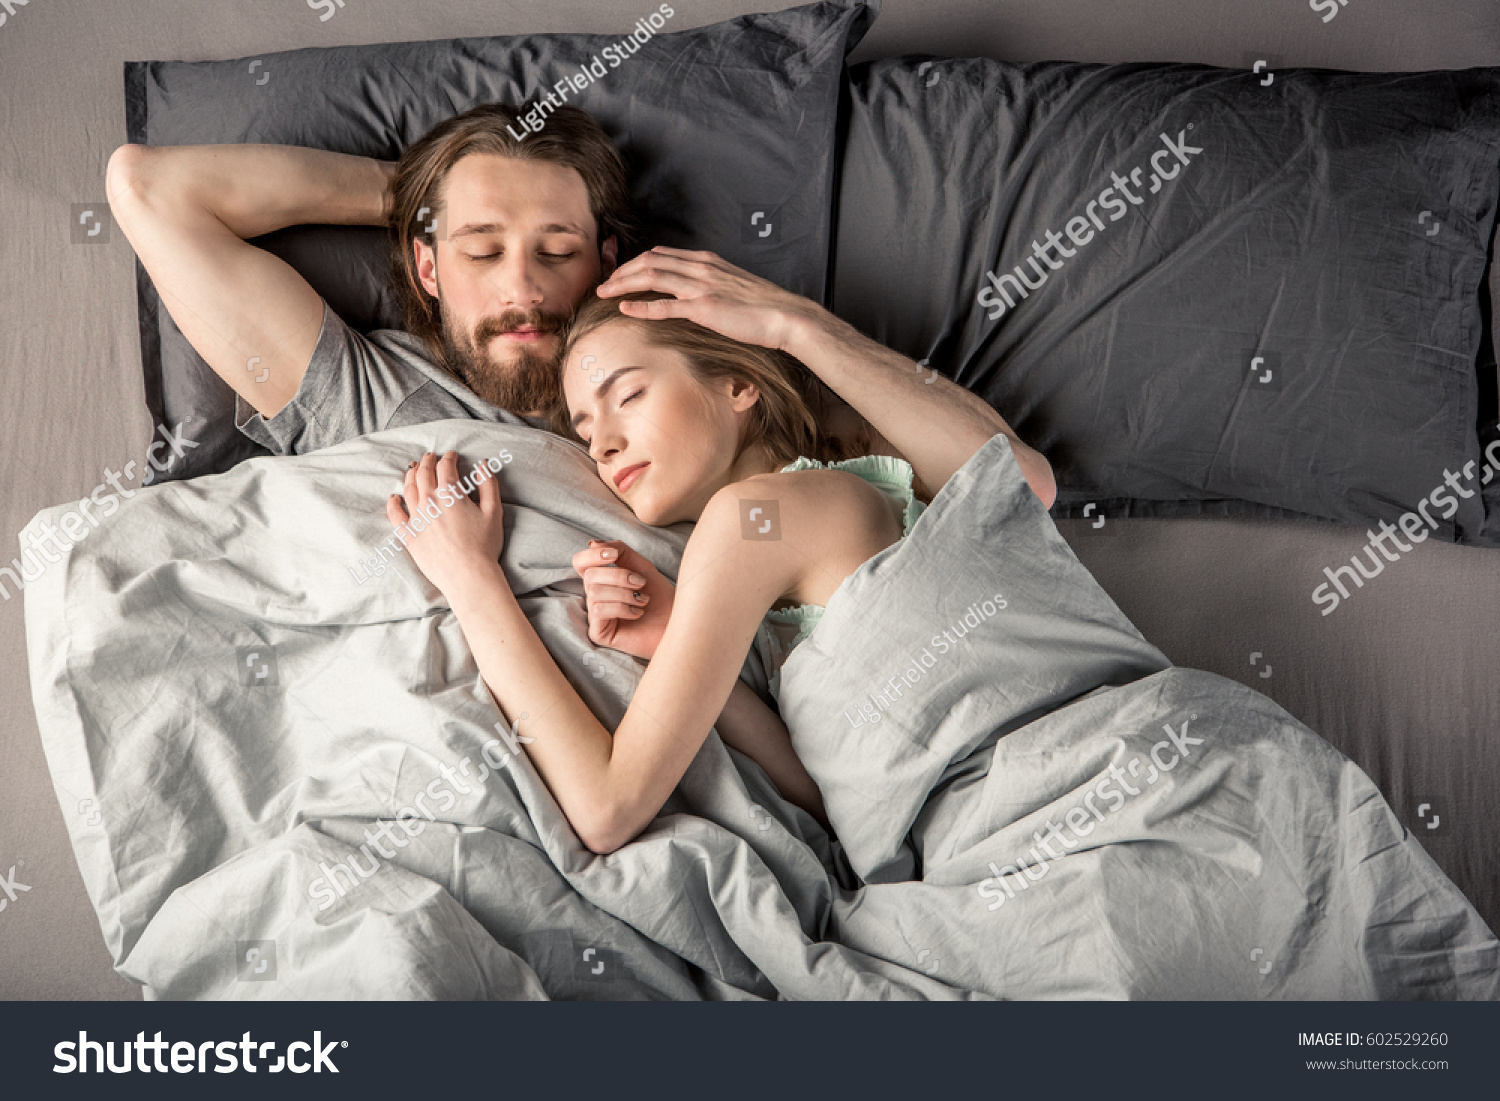 Overhead view of young couple sleeping in bed #602529260